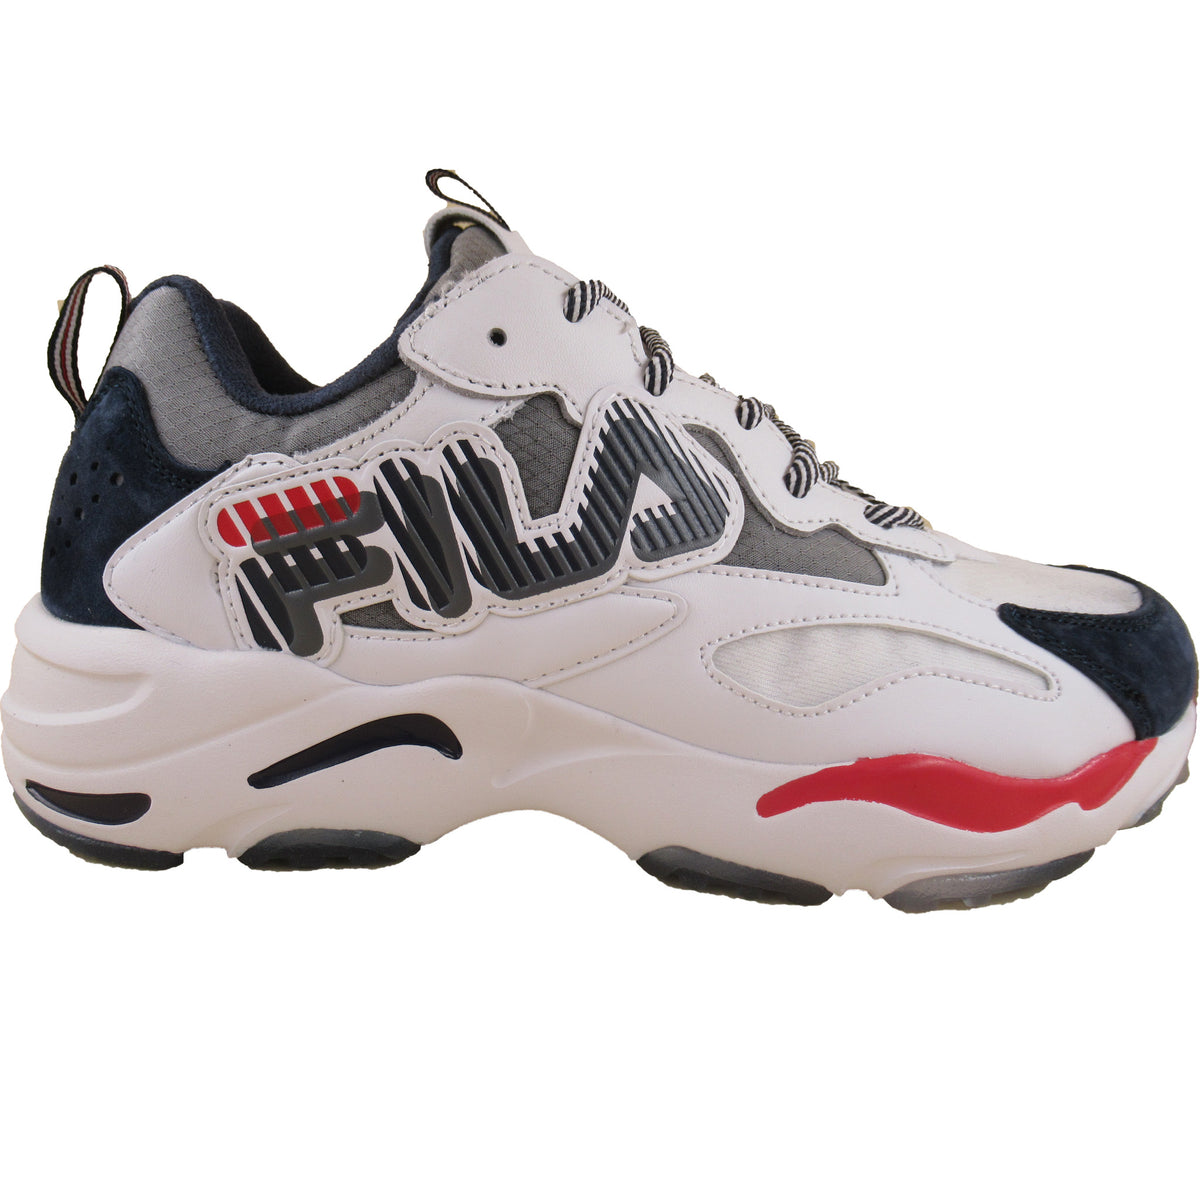 Fila Ray Tracer Graphic White Navy Red Casual Shoes – That Shoe Store and More